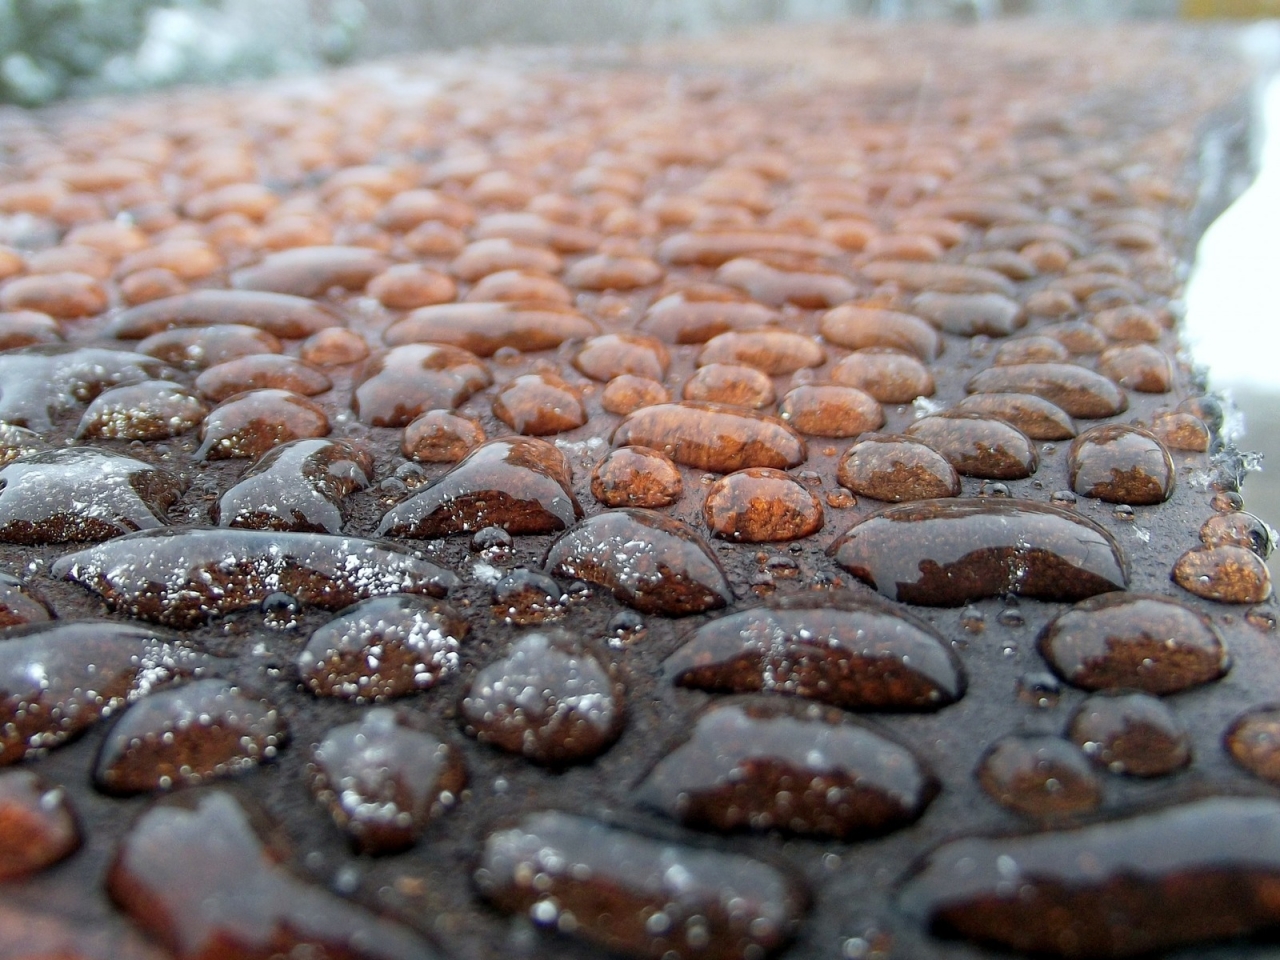 Rain Water Droplets for 1280 x 960 resolution